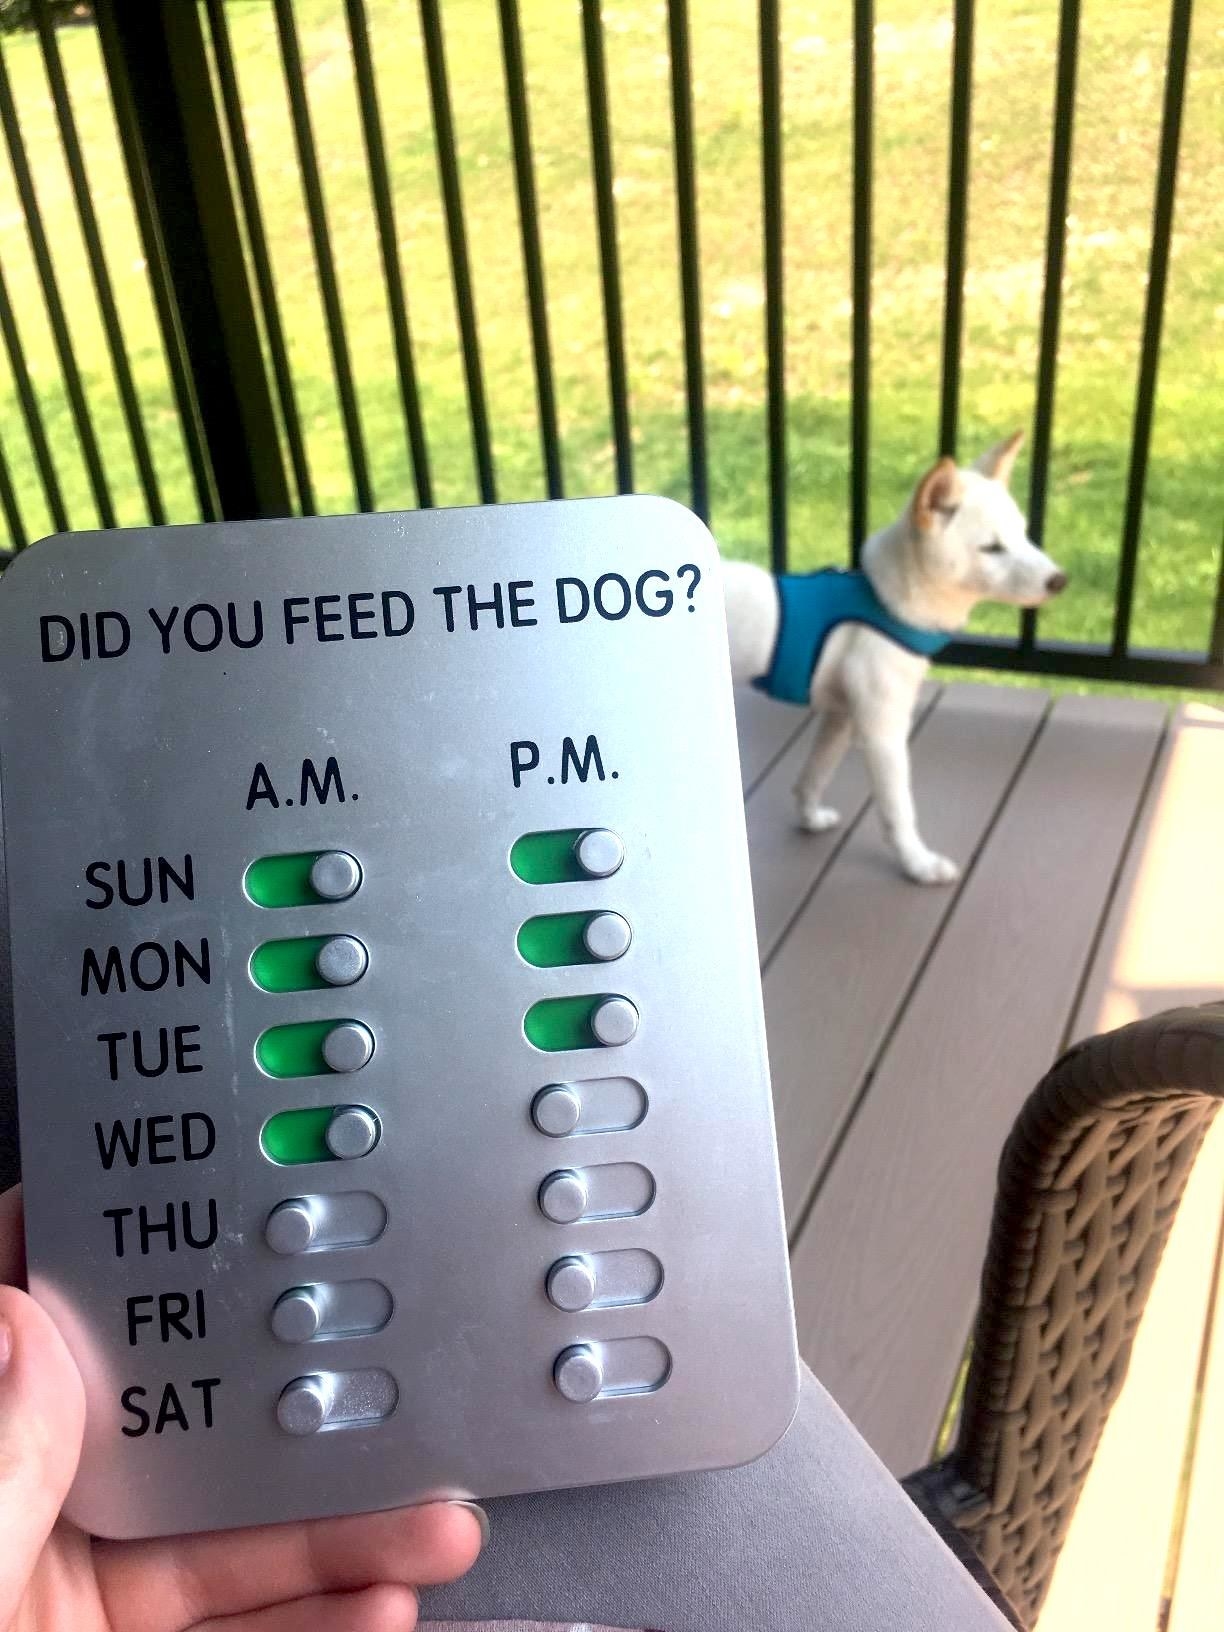 A reviewer holding the did you feed the dog device, which is labeled with the days of the weeks and columns for morning and evening. There are nobs to switch to green to indicate whether the dog has been fed